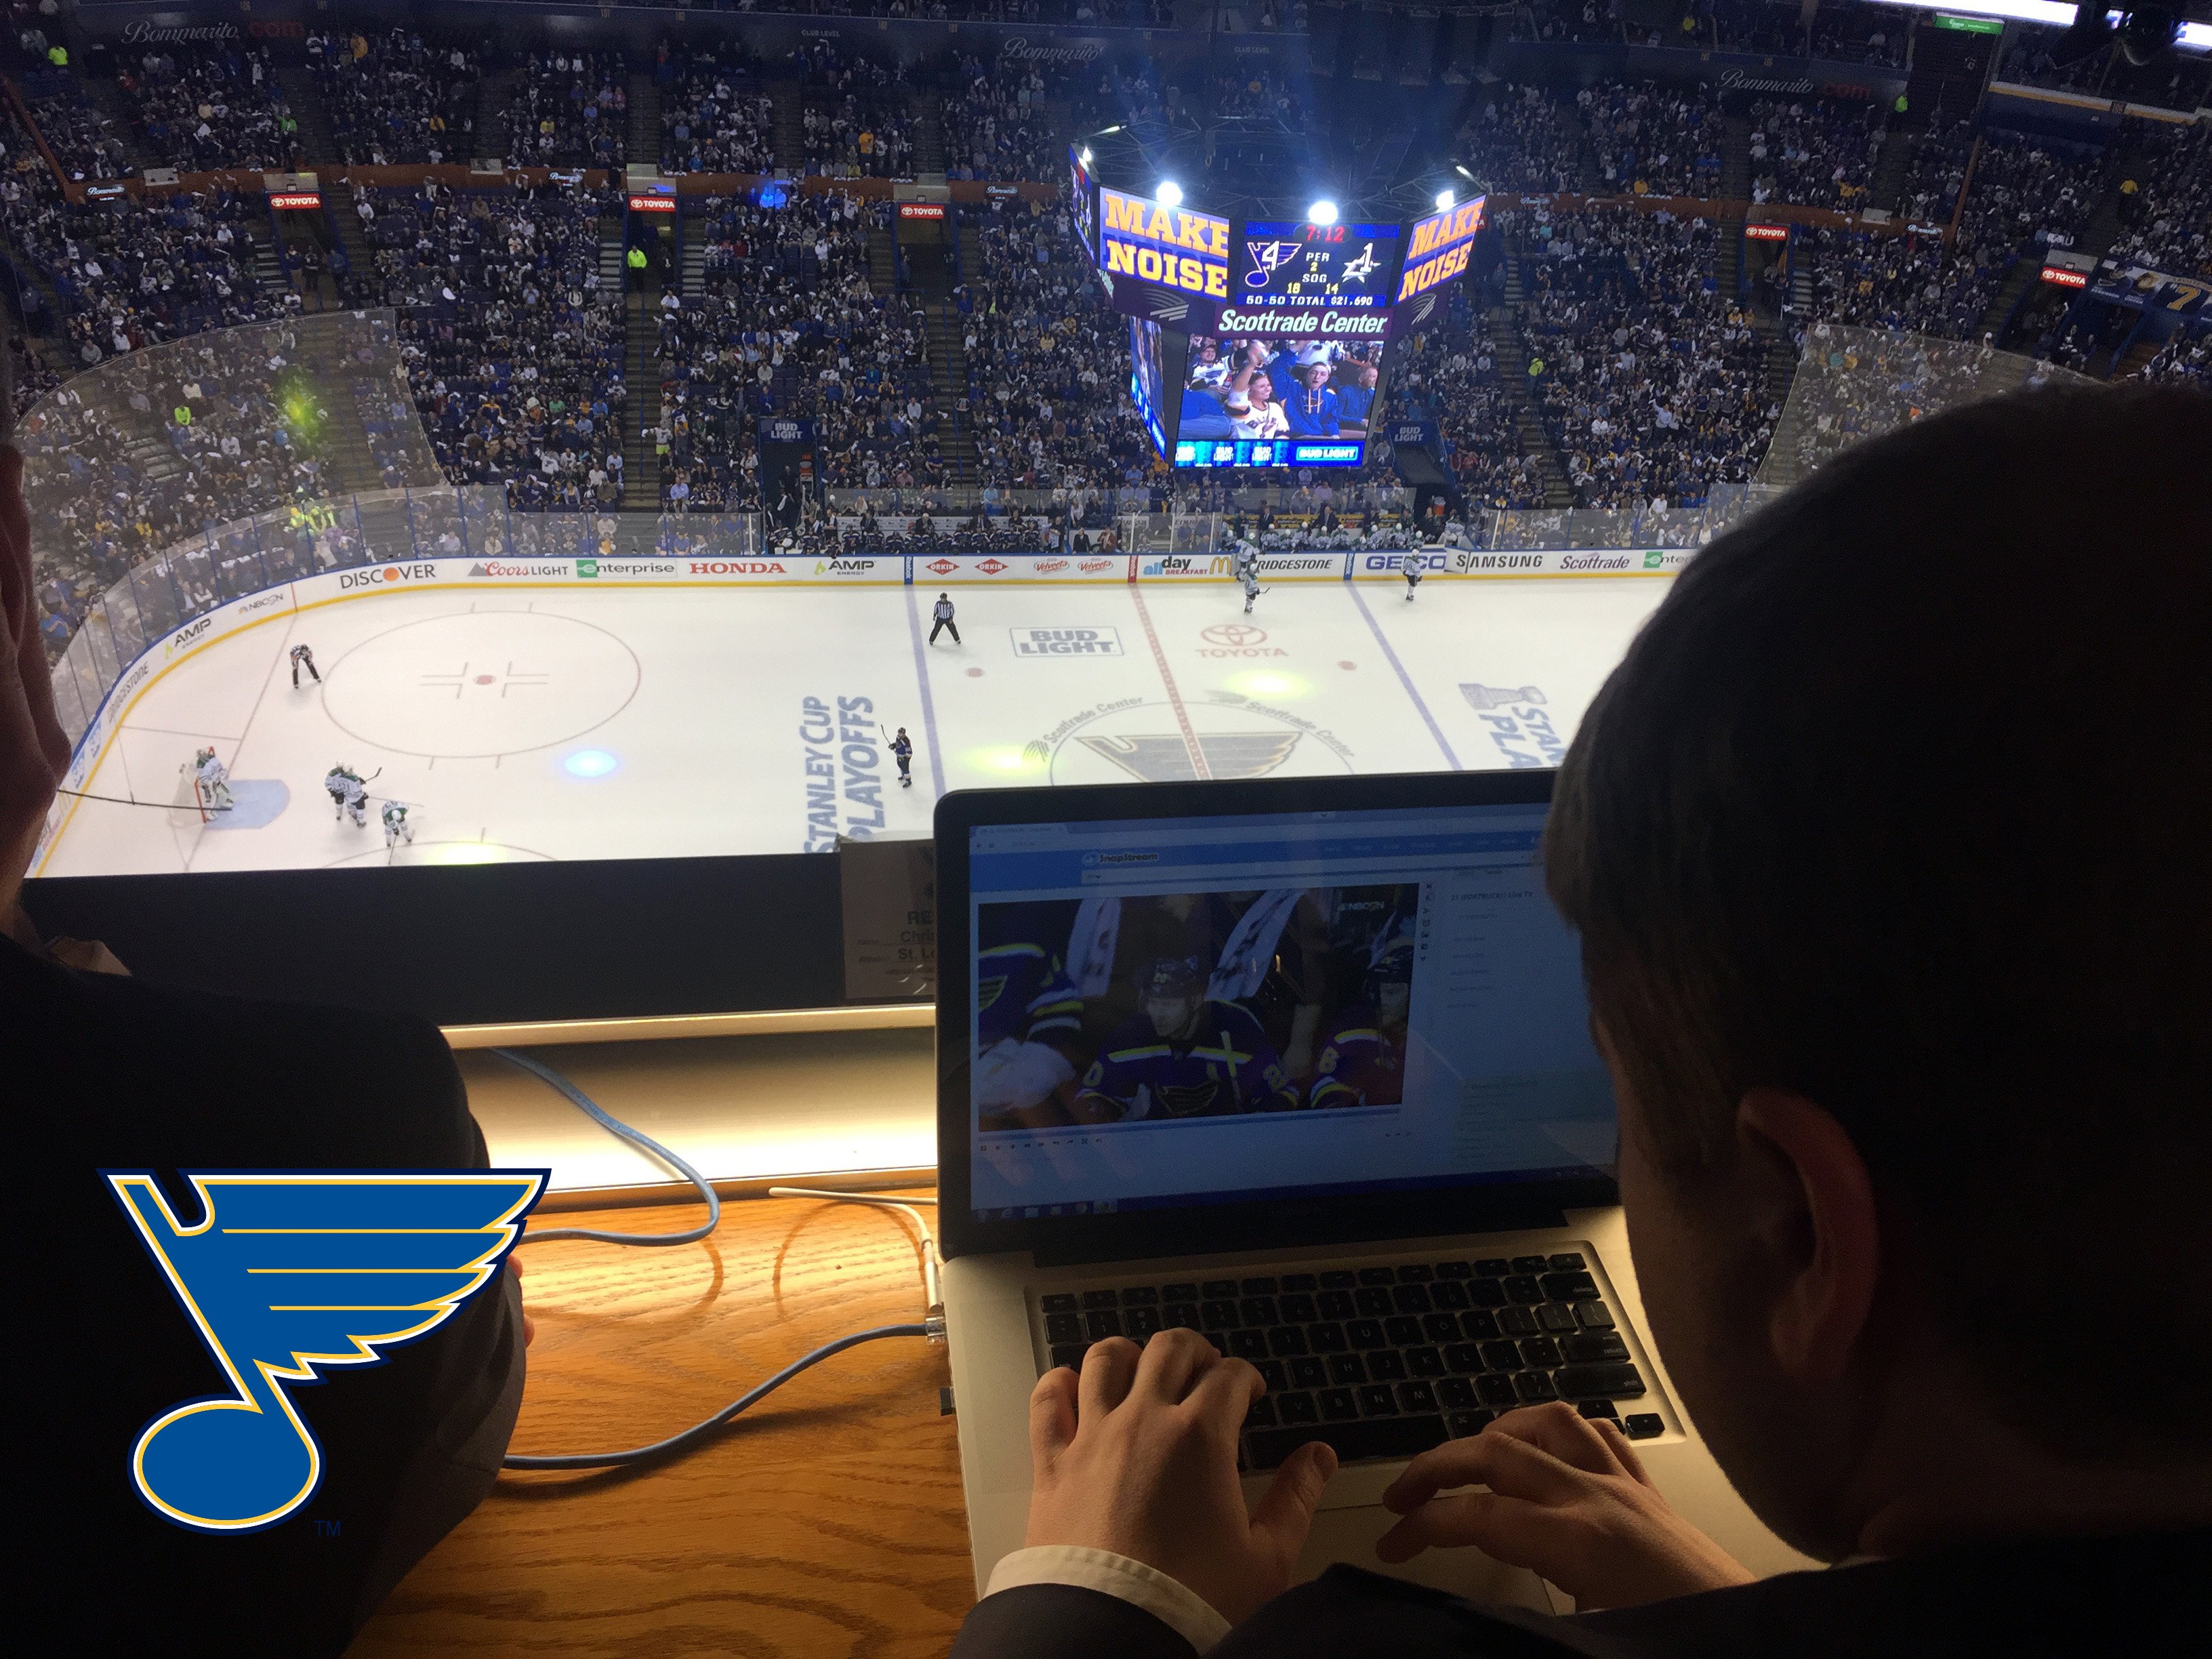 The St. Louis Blues Digital Team Use SnapStream During the NHL 2016 Post-Season